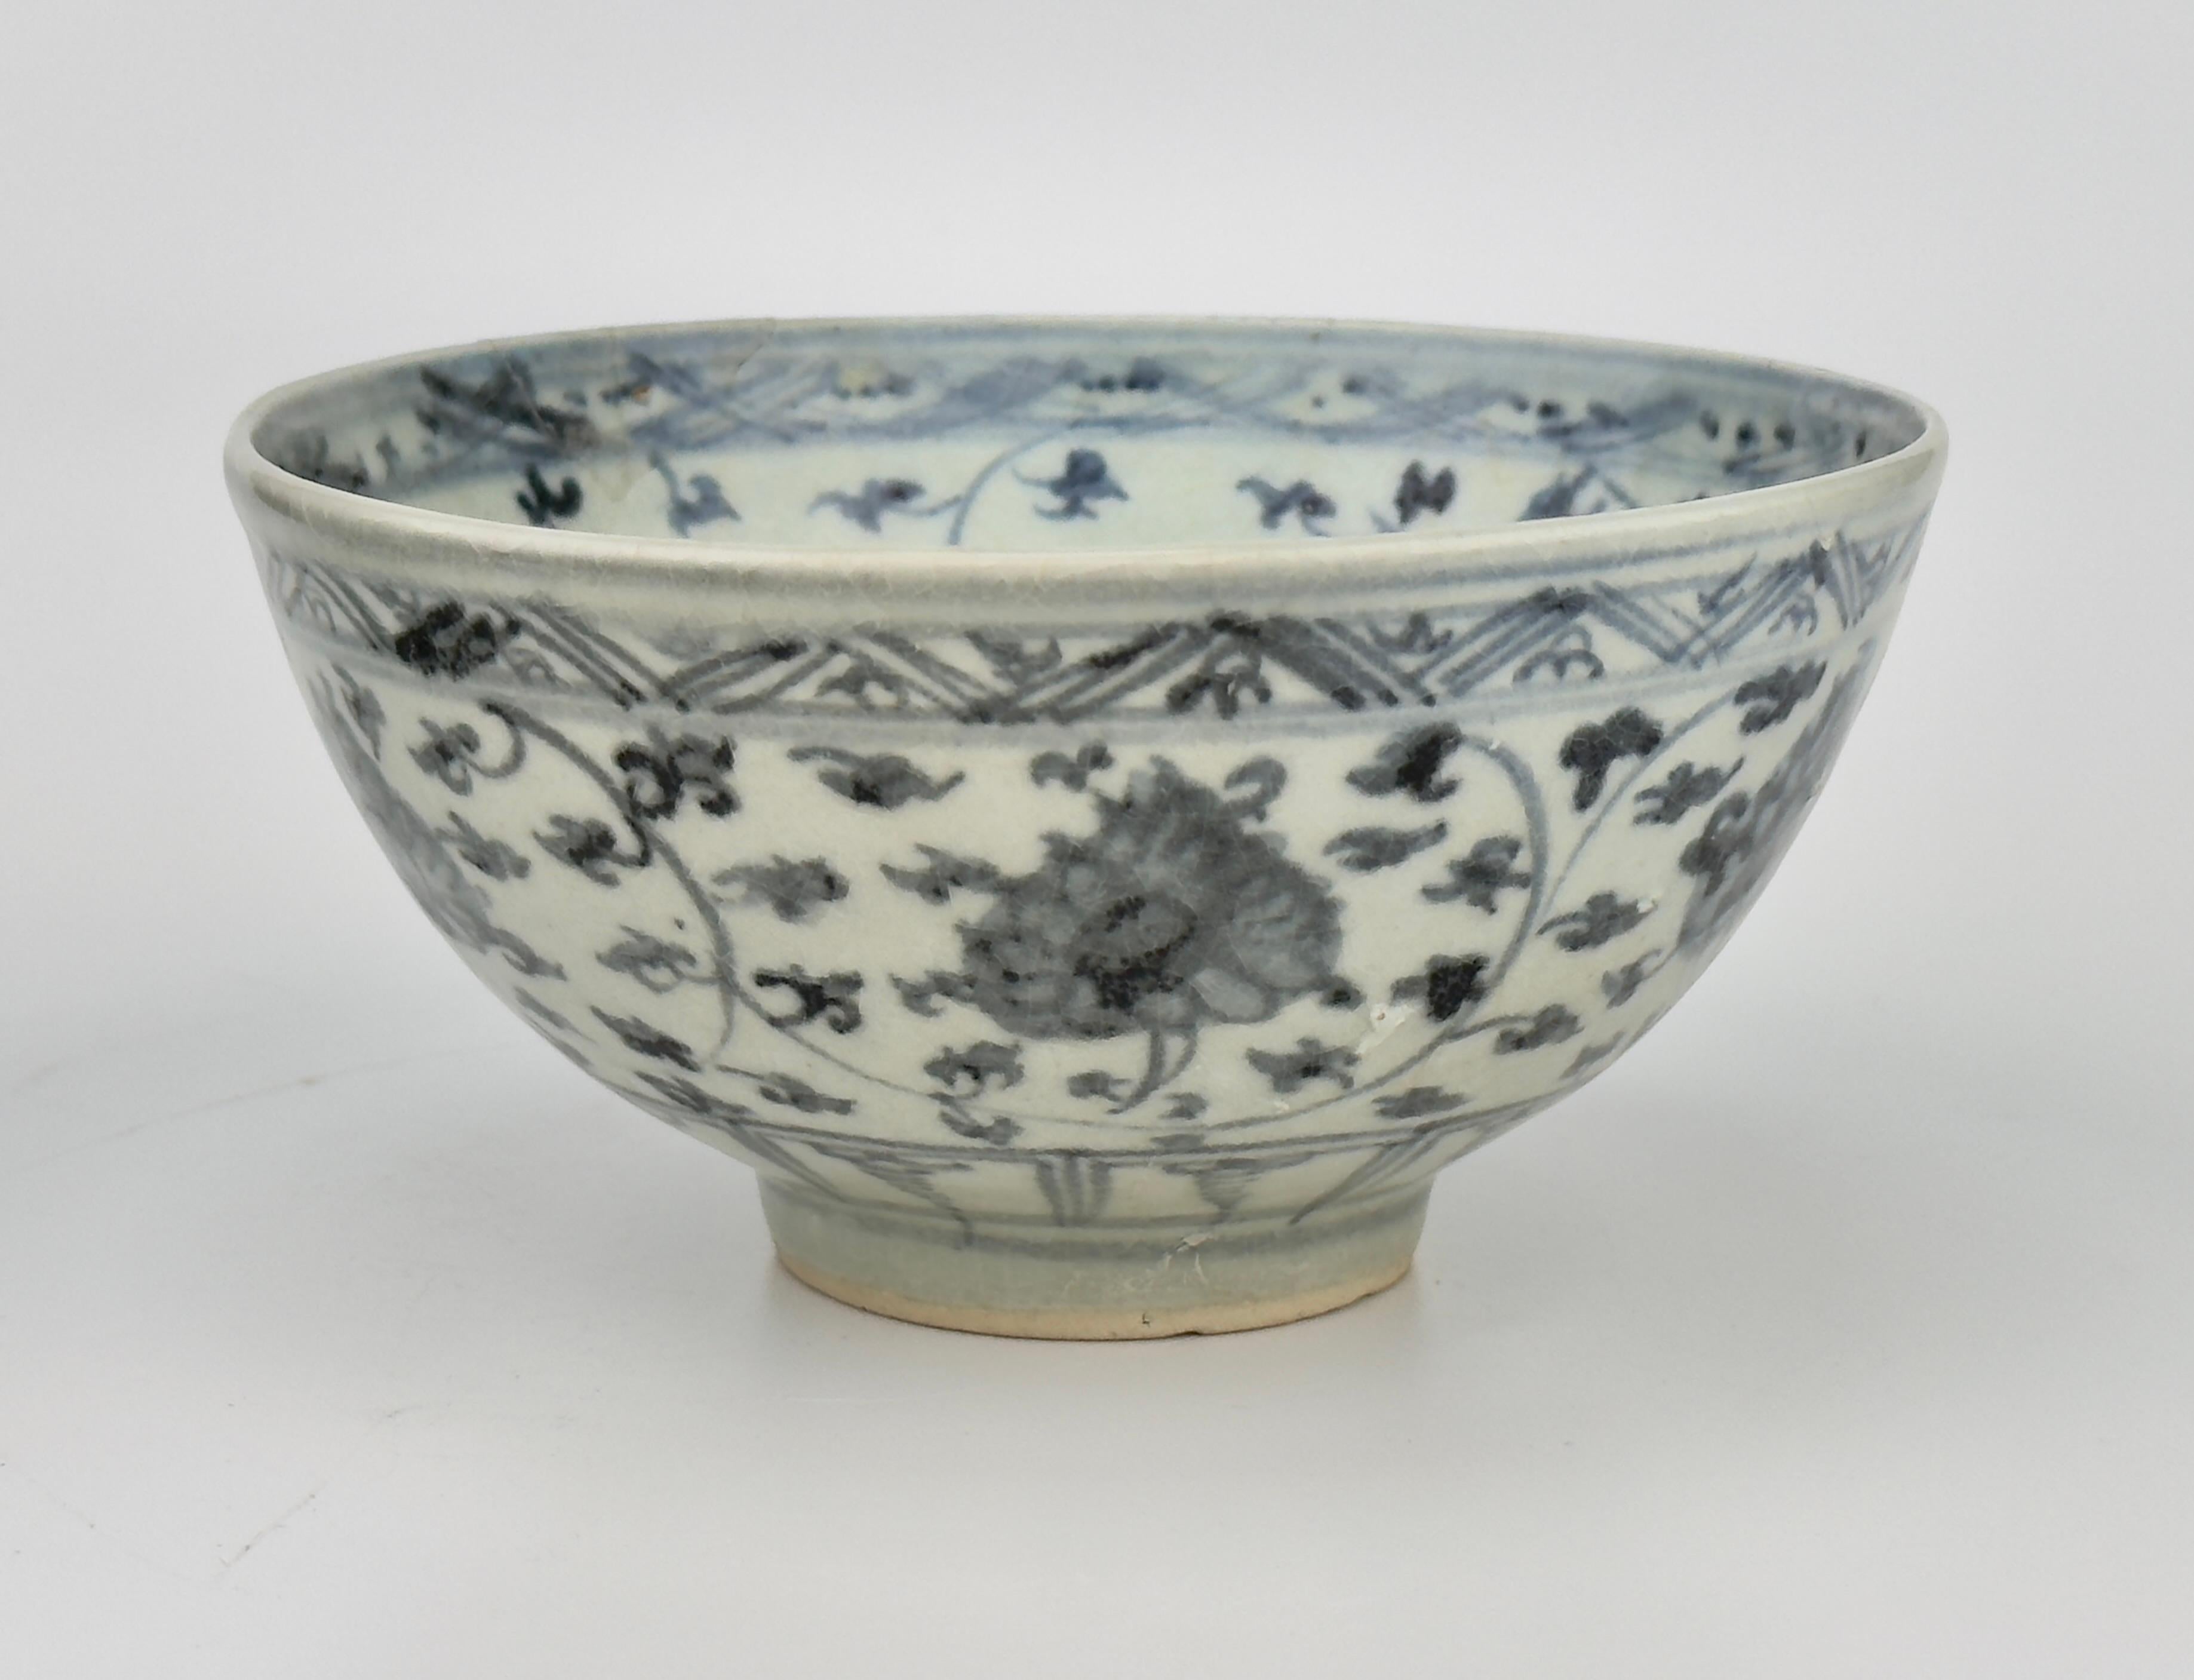 Ceramic Two Bowls with knot shaped design on inside, Ming Era(15th century) For Sale